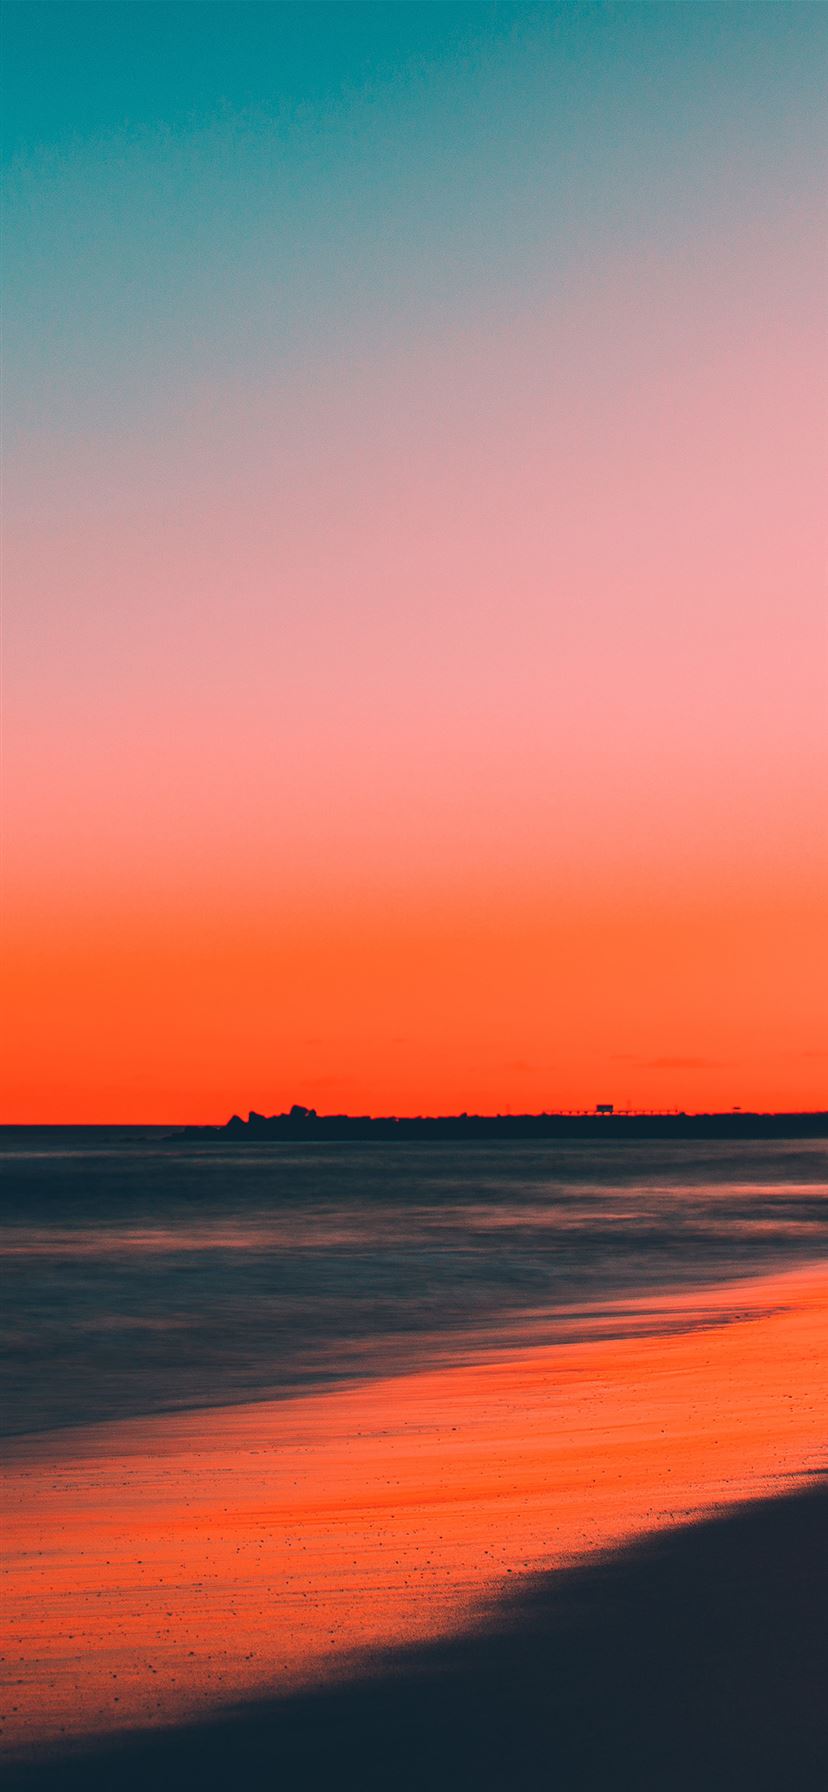 Sunset Beach Iphone 11 Wallpapers Free Download